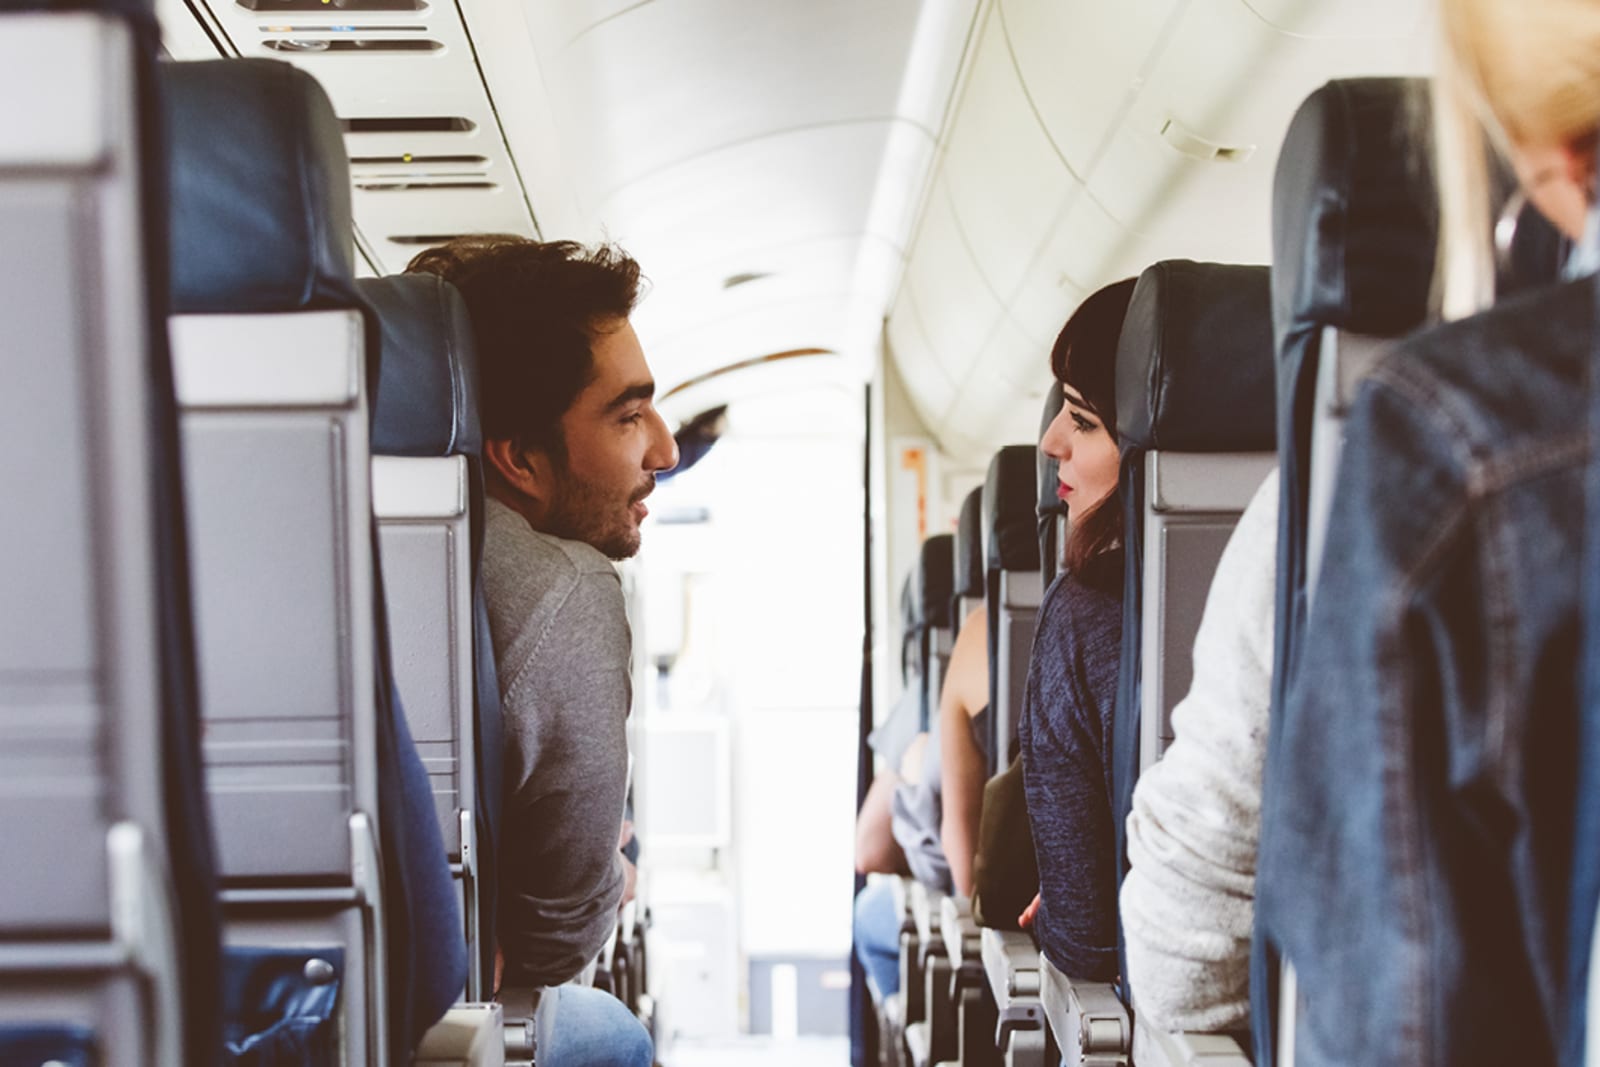 Two passengers on an airplane, speaking to each other across the aisle